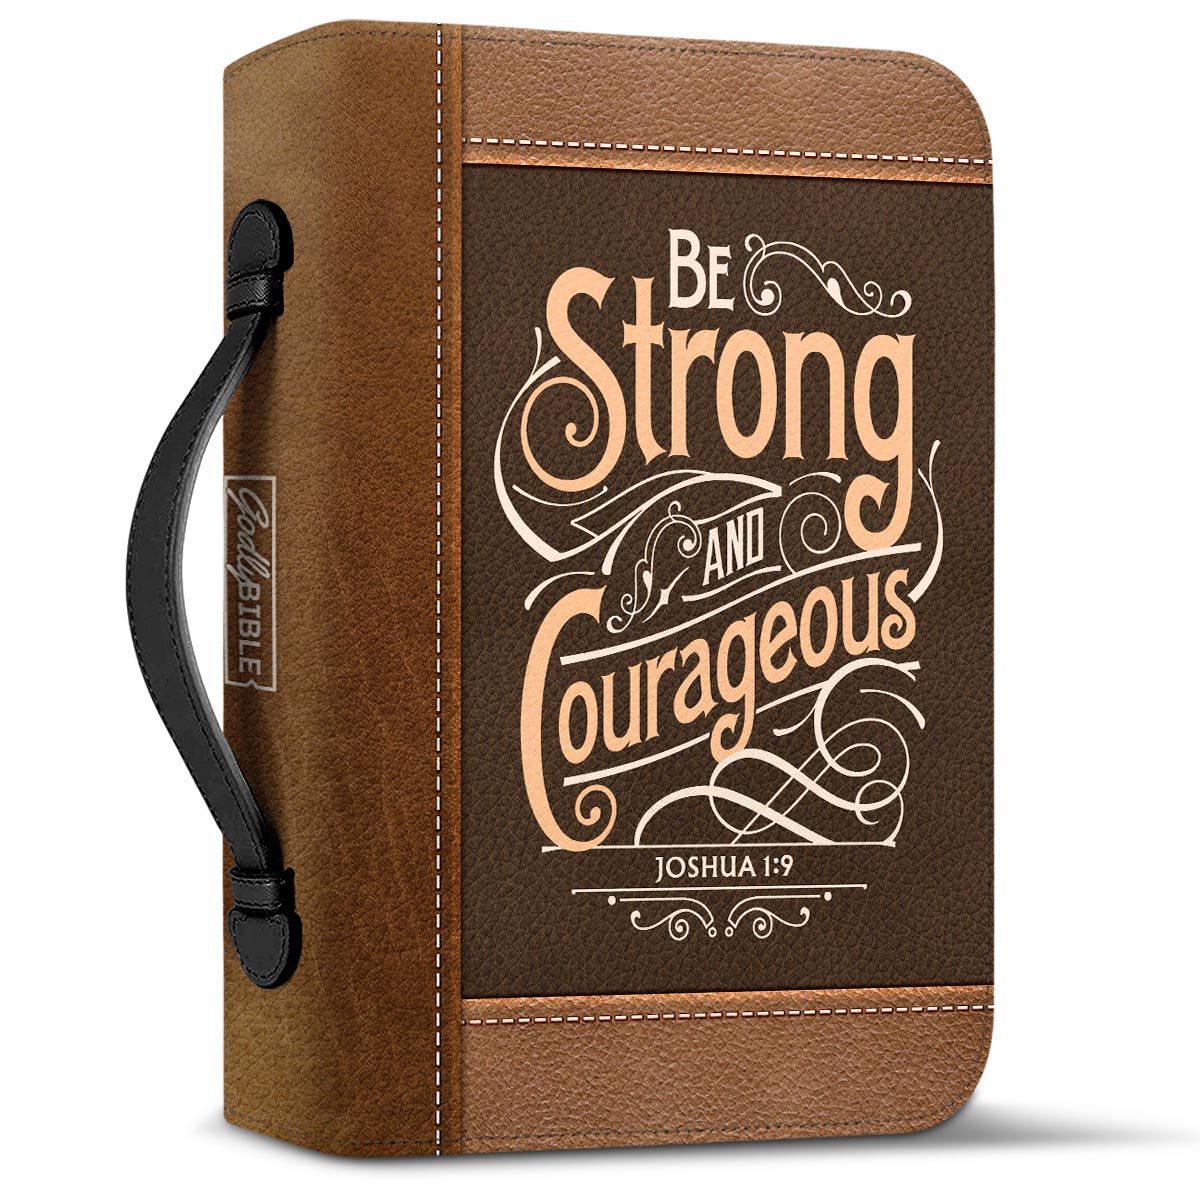  Personalized Bible Cover - Be Strong And Courageous Joshua 1 9 Bible Cover for Christians